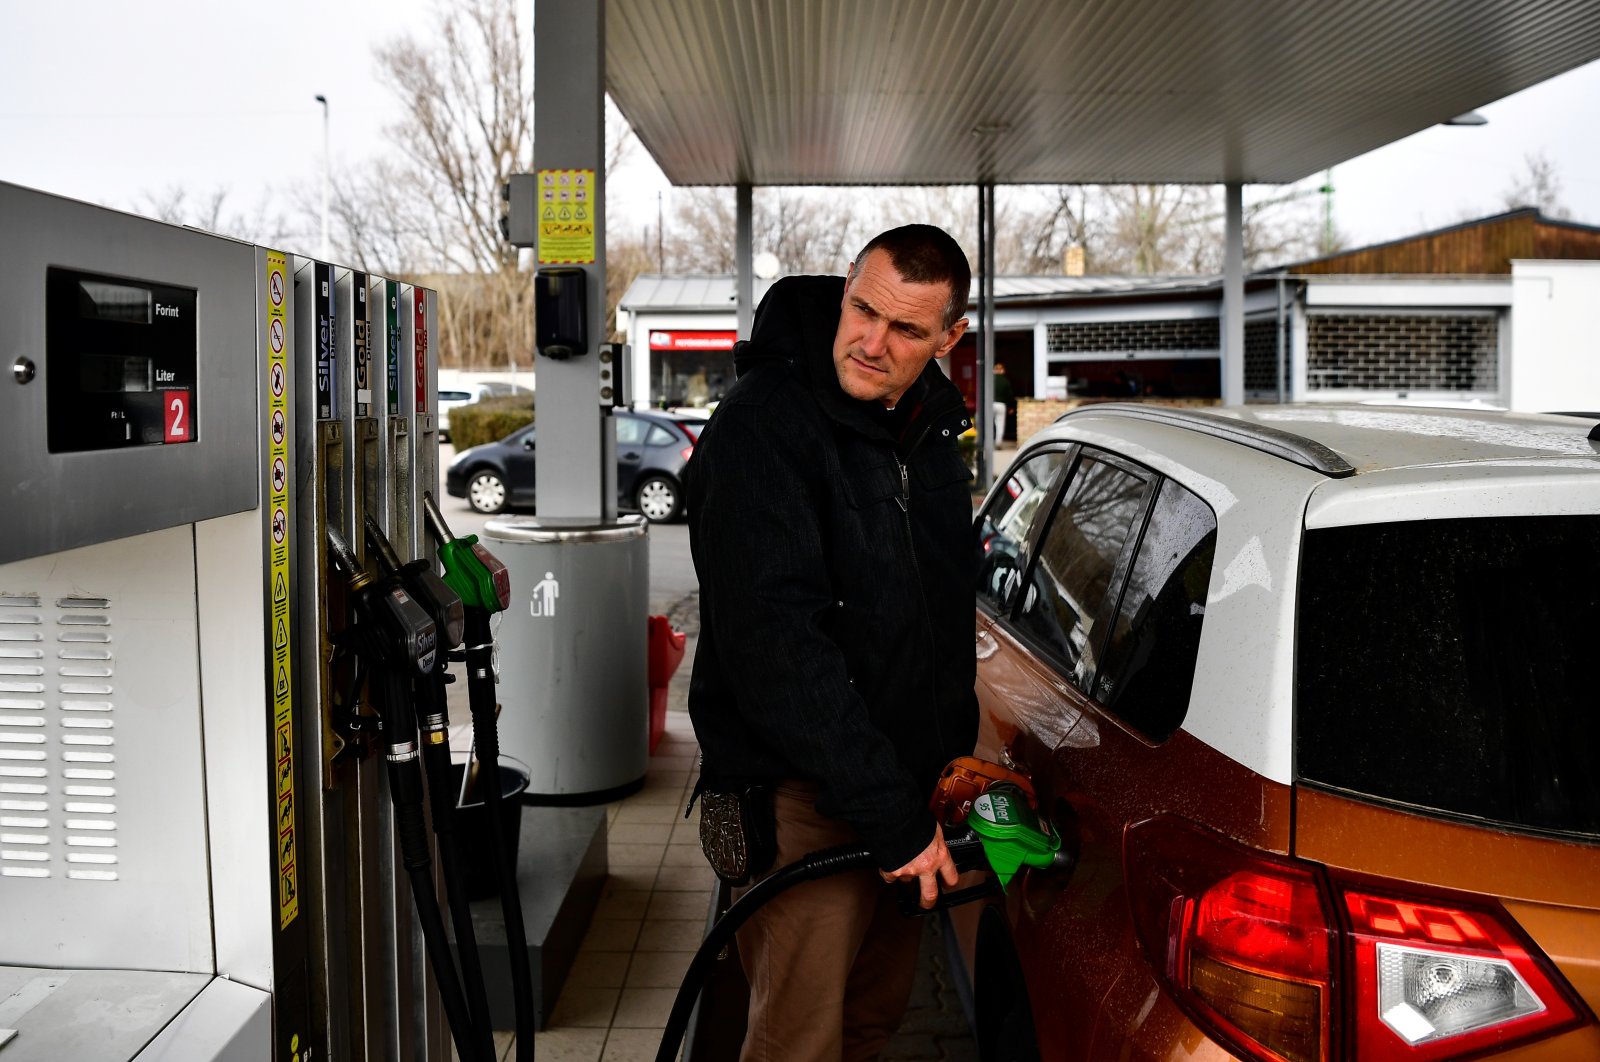 A driver fills a car at a gas station in Martonvasar, Hungary, March 18, 2022. (Reuters Photo)